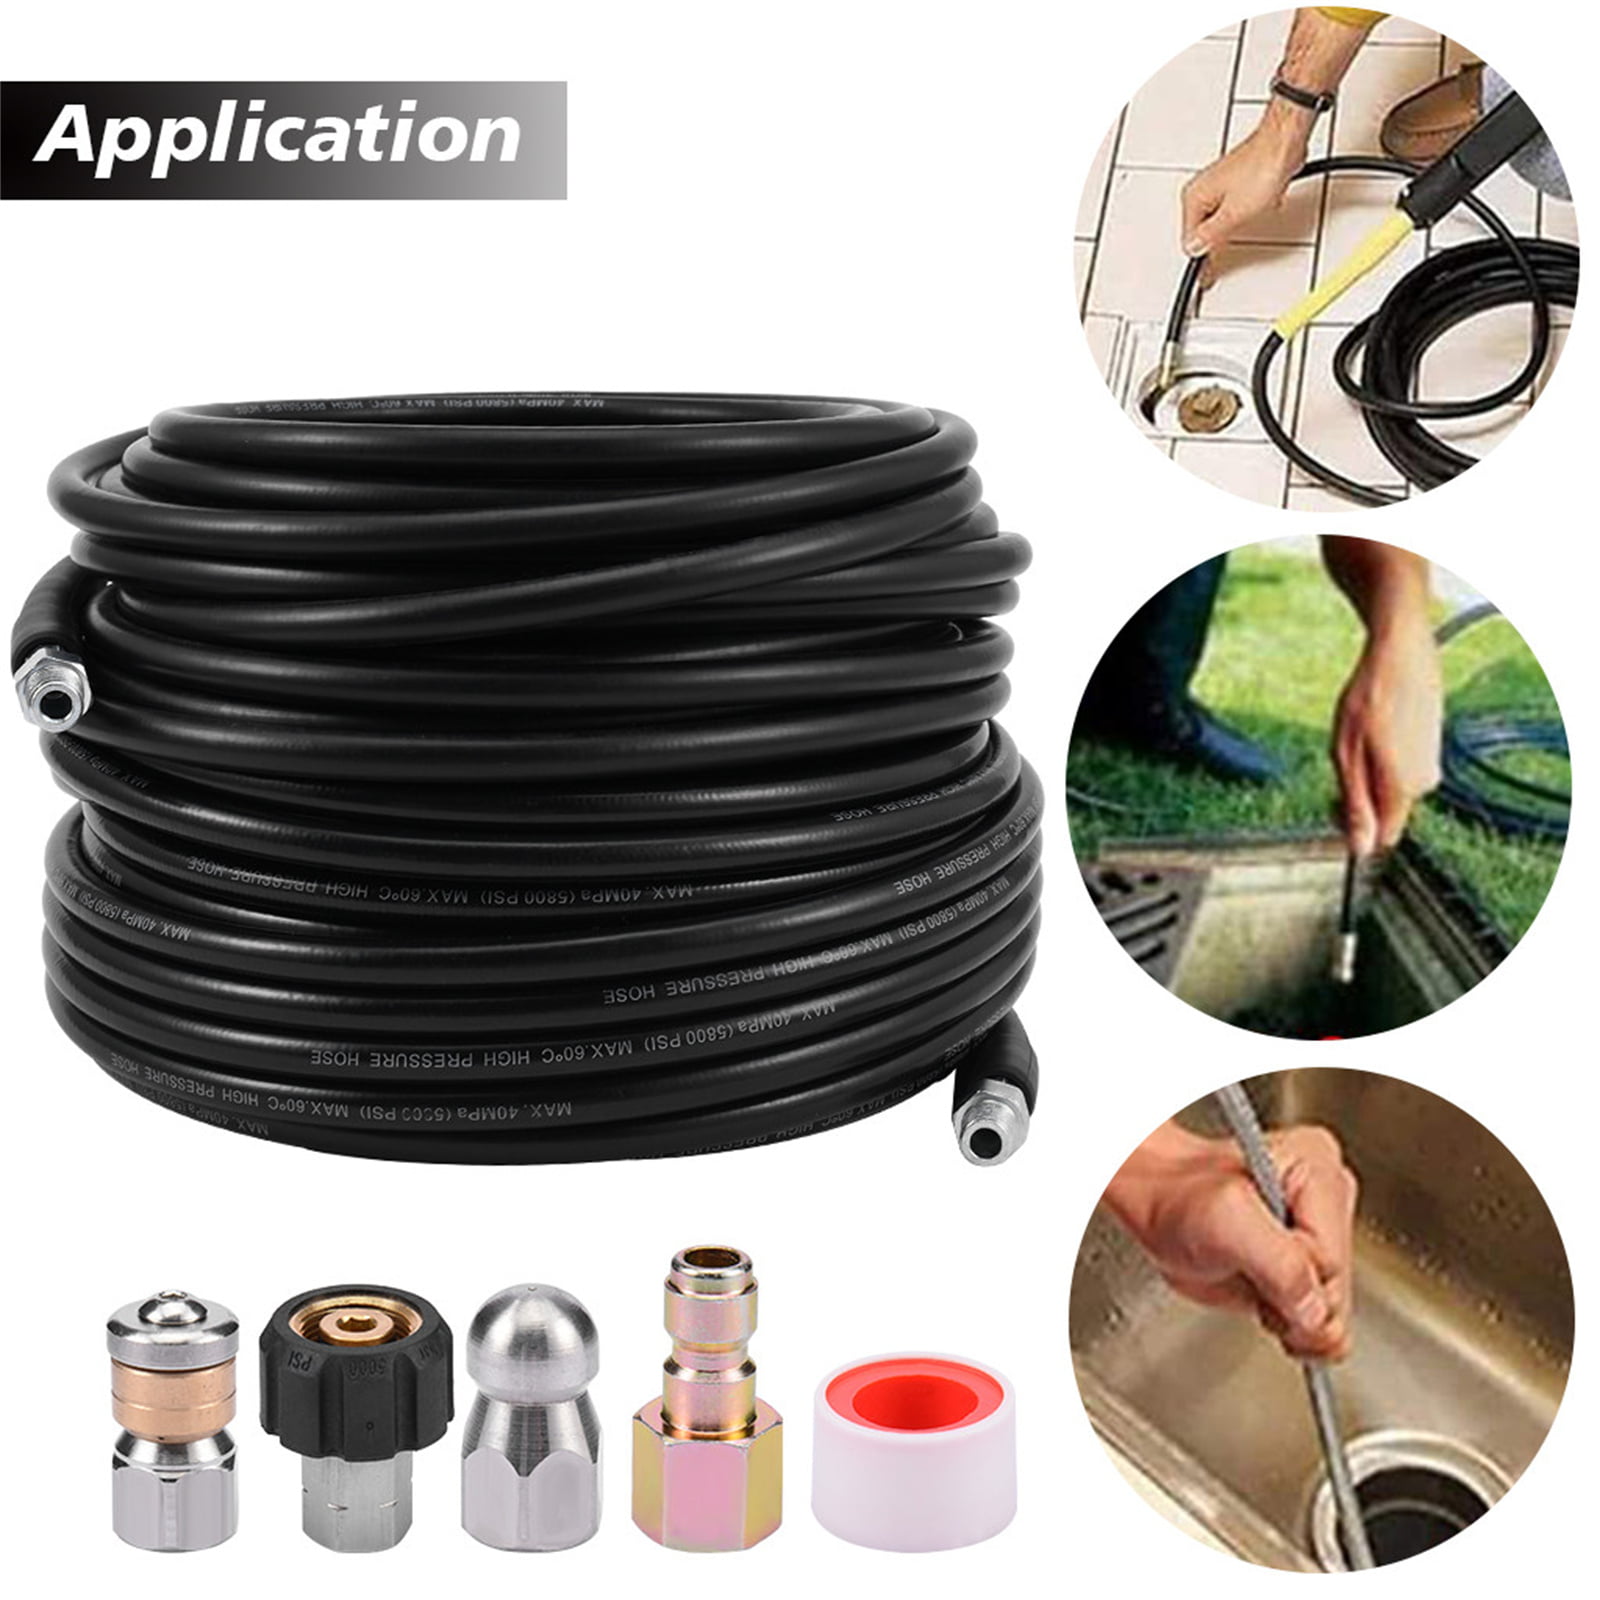 50FT Sewer Jetter Nozzles Kit for Pressure Washer 1/4 Inch NPT 5800 PSI 